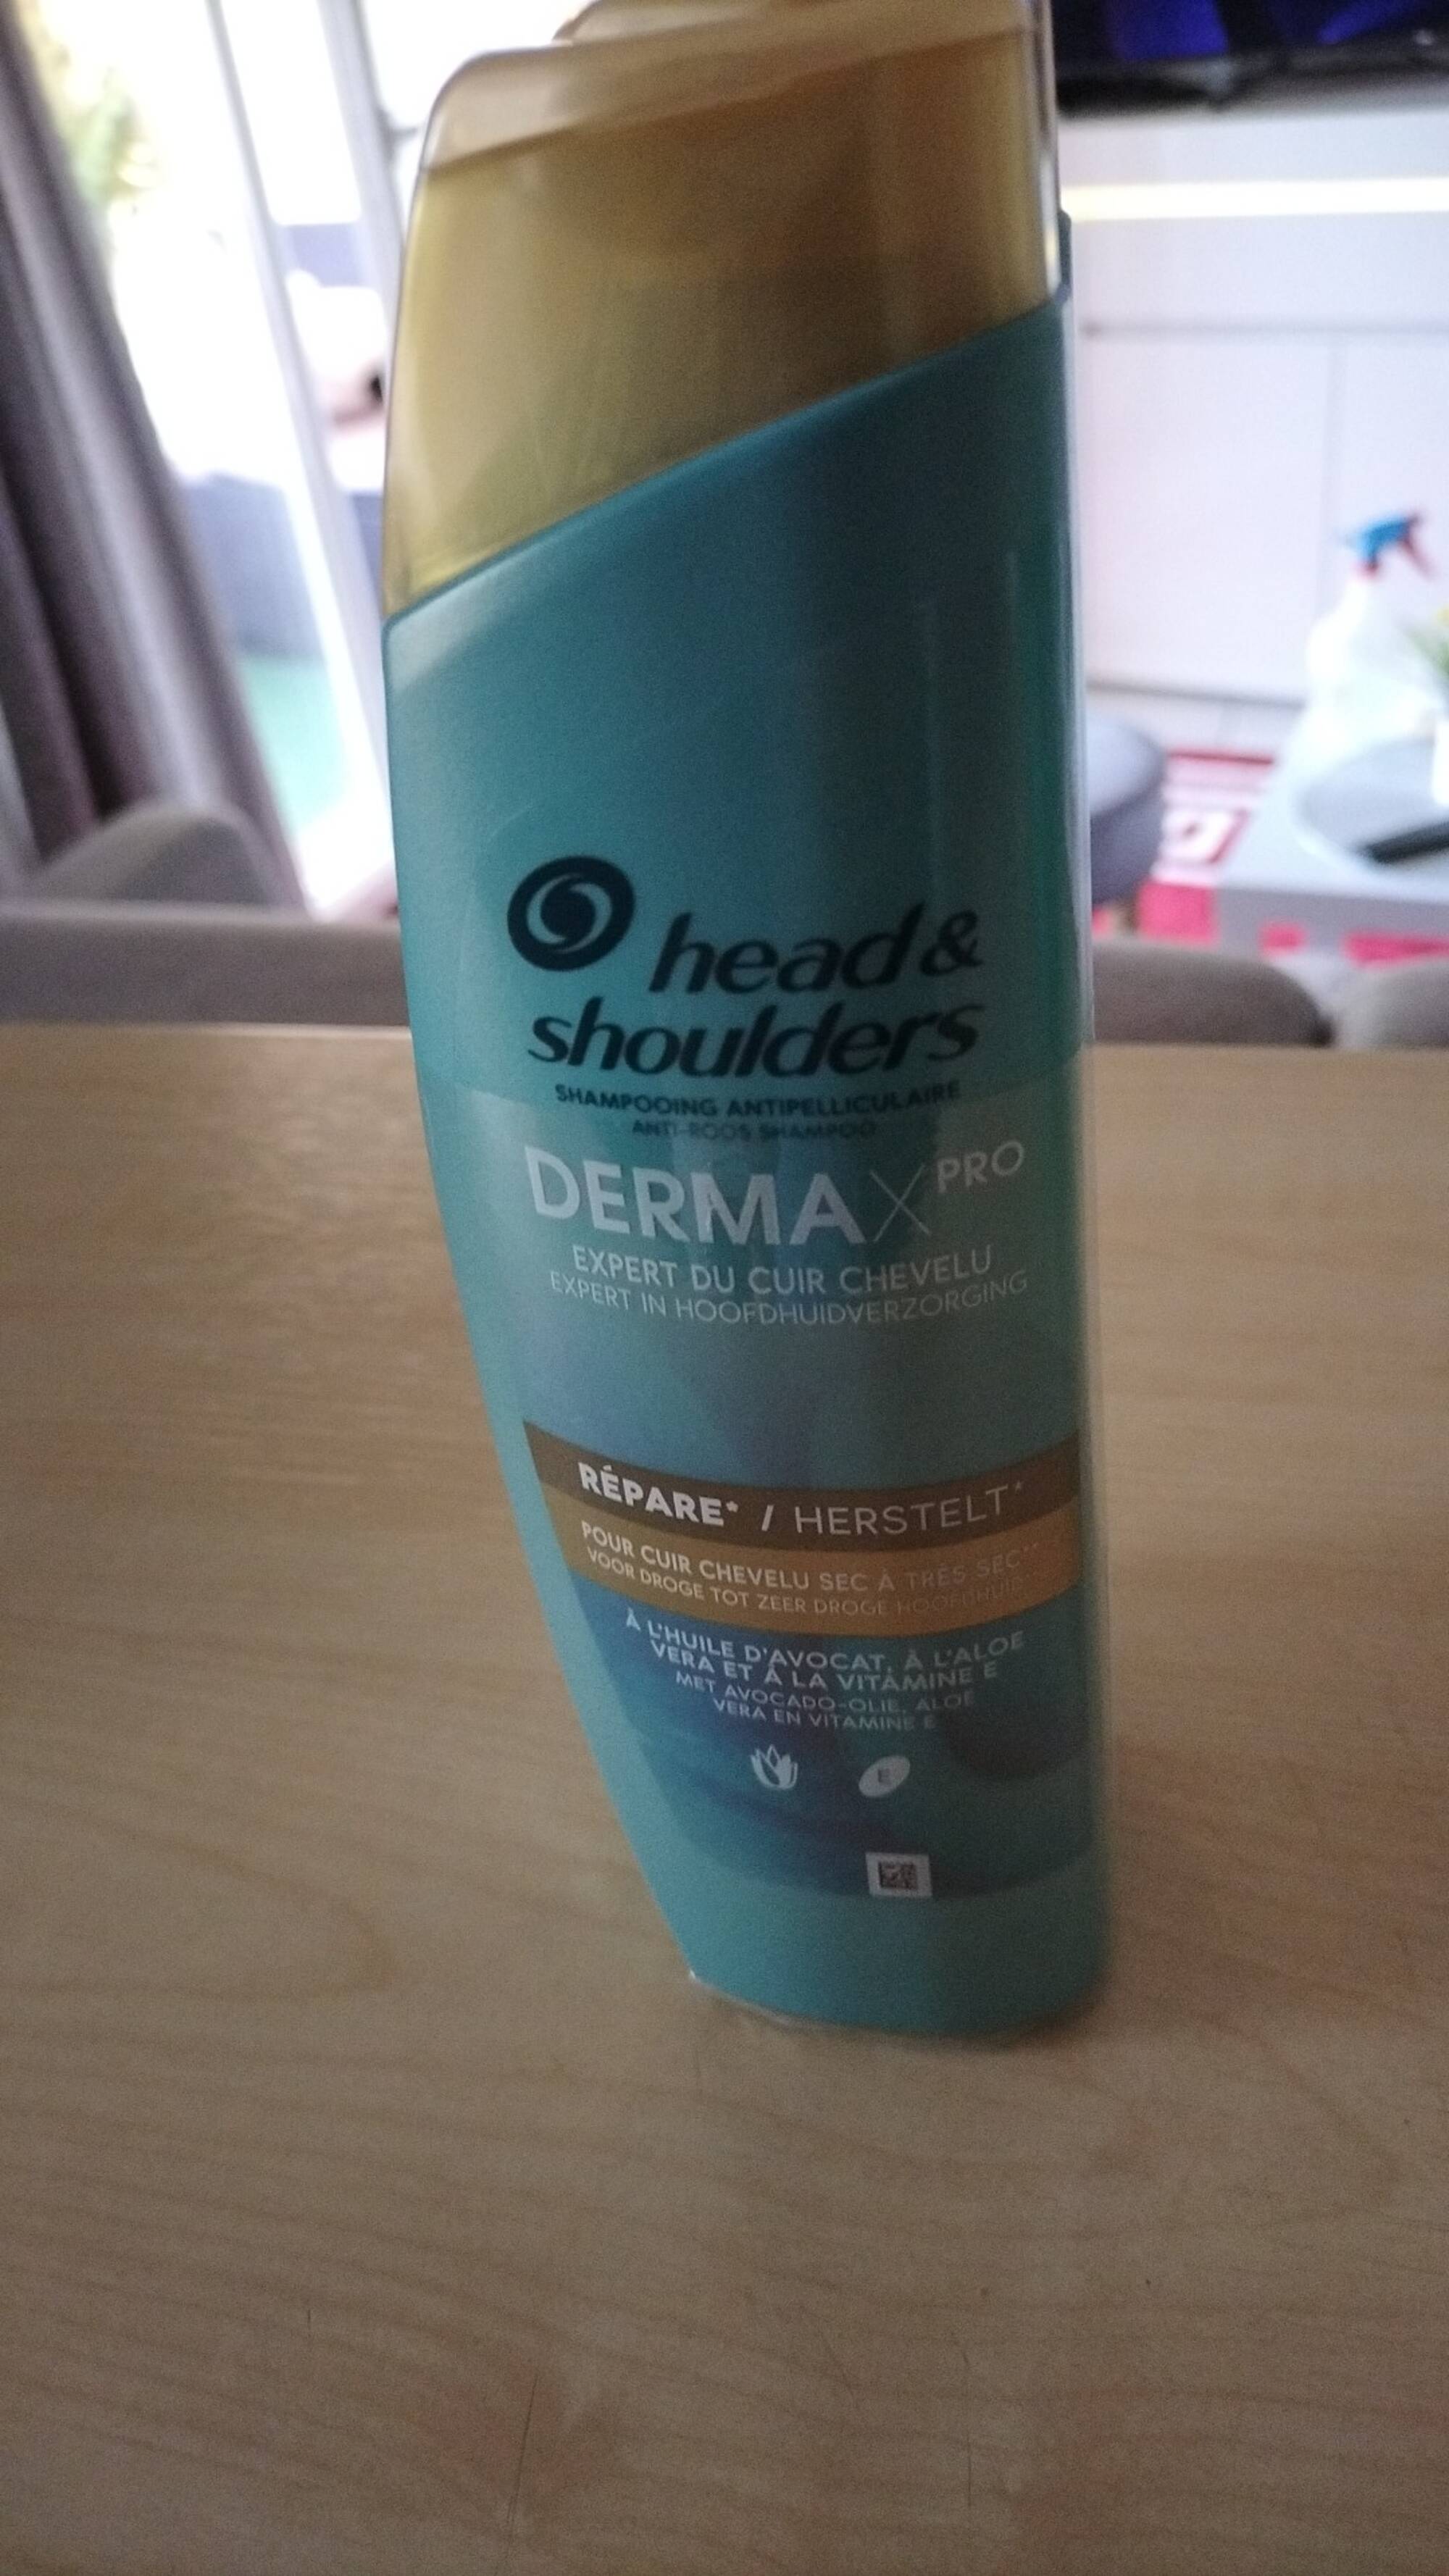 HEAD & SHOULDERS - Derma Xpro - Shampooing antipelliculaire